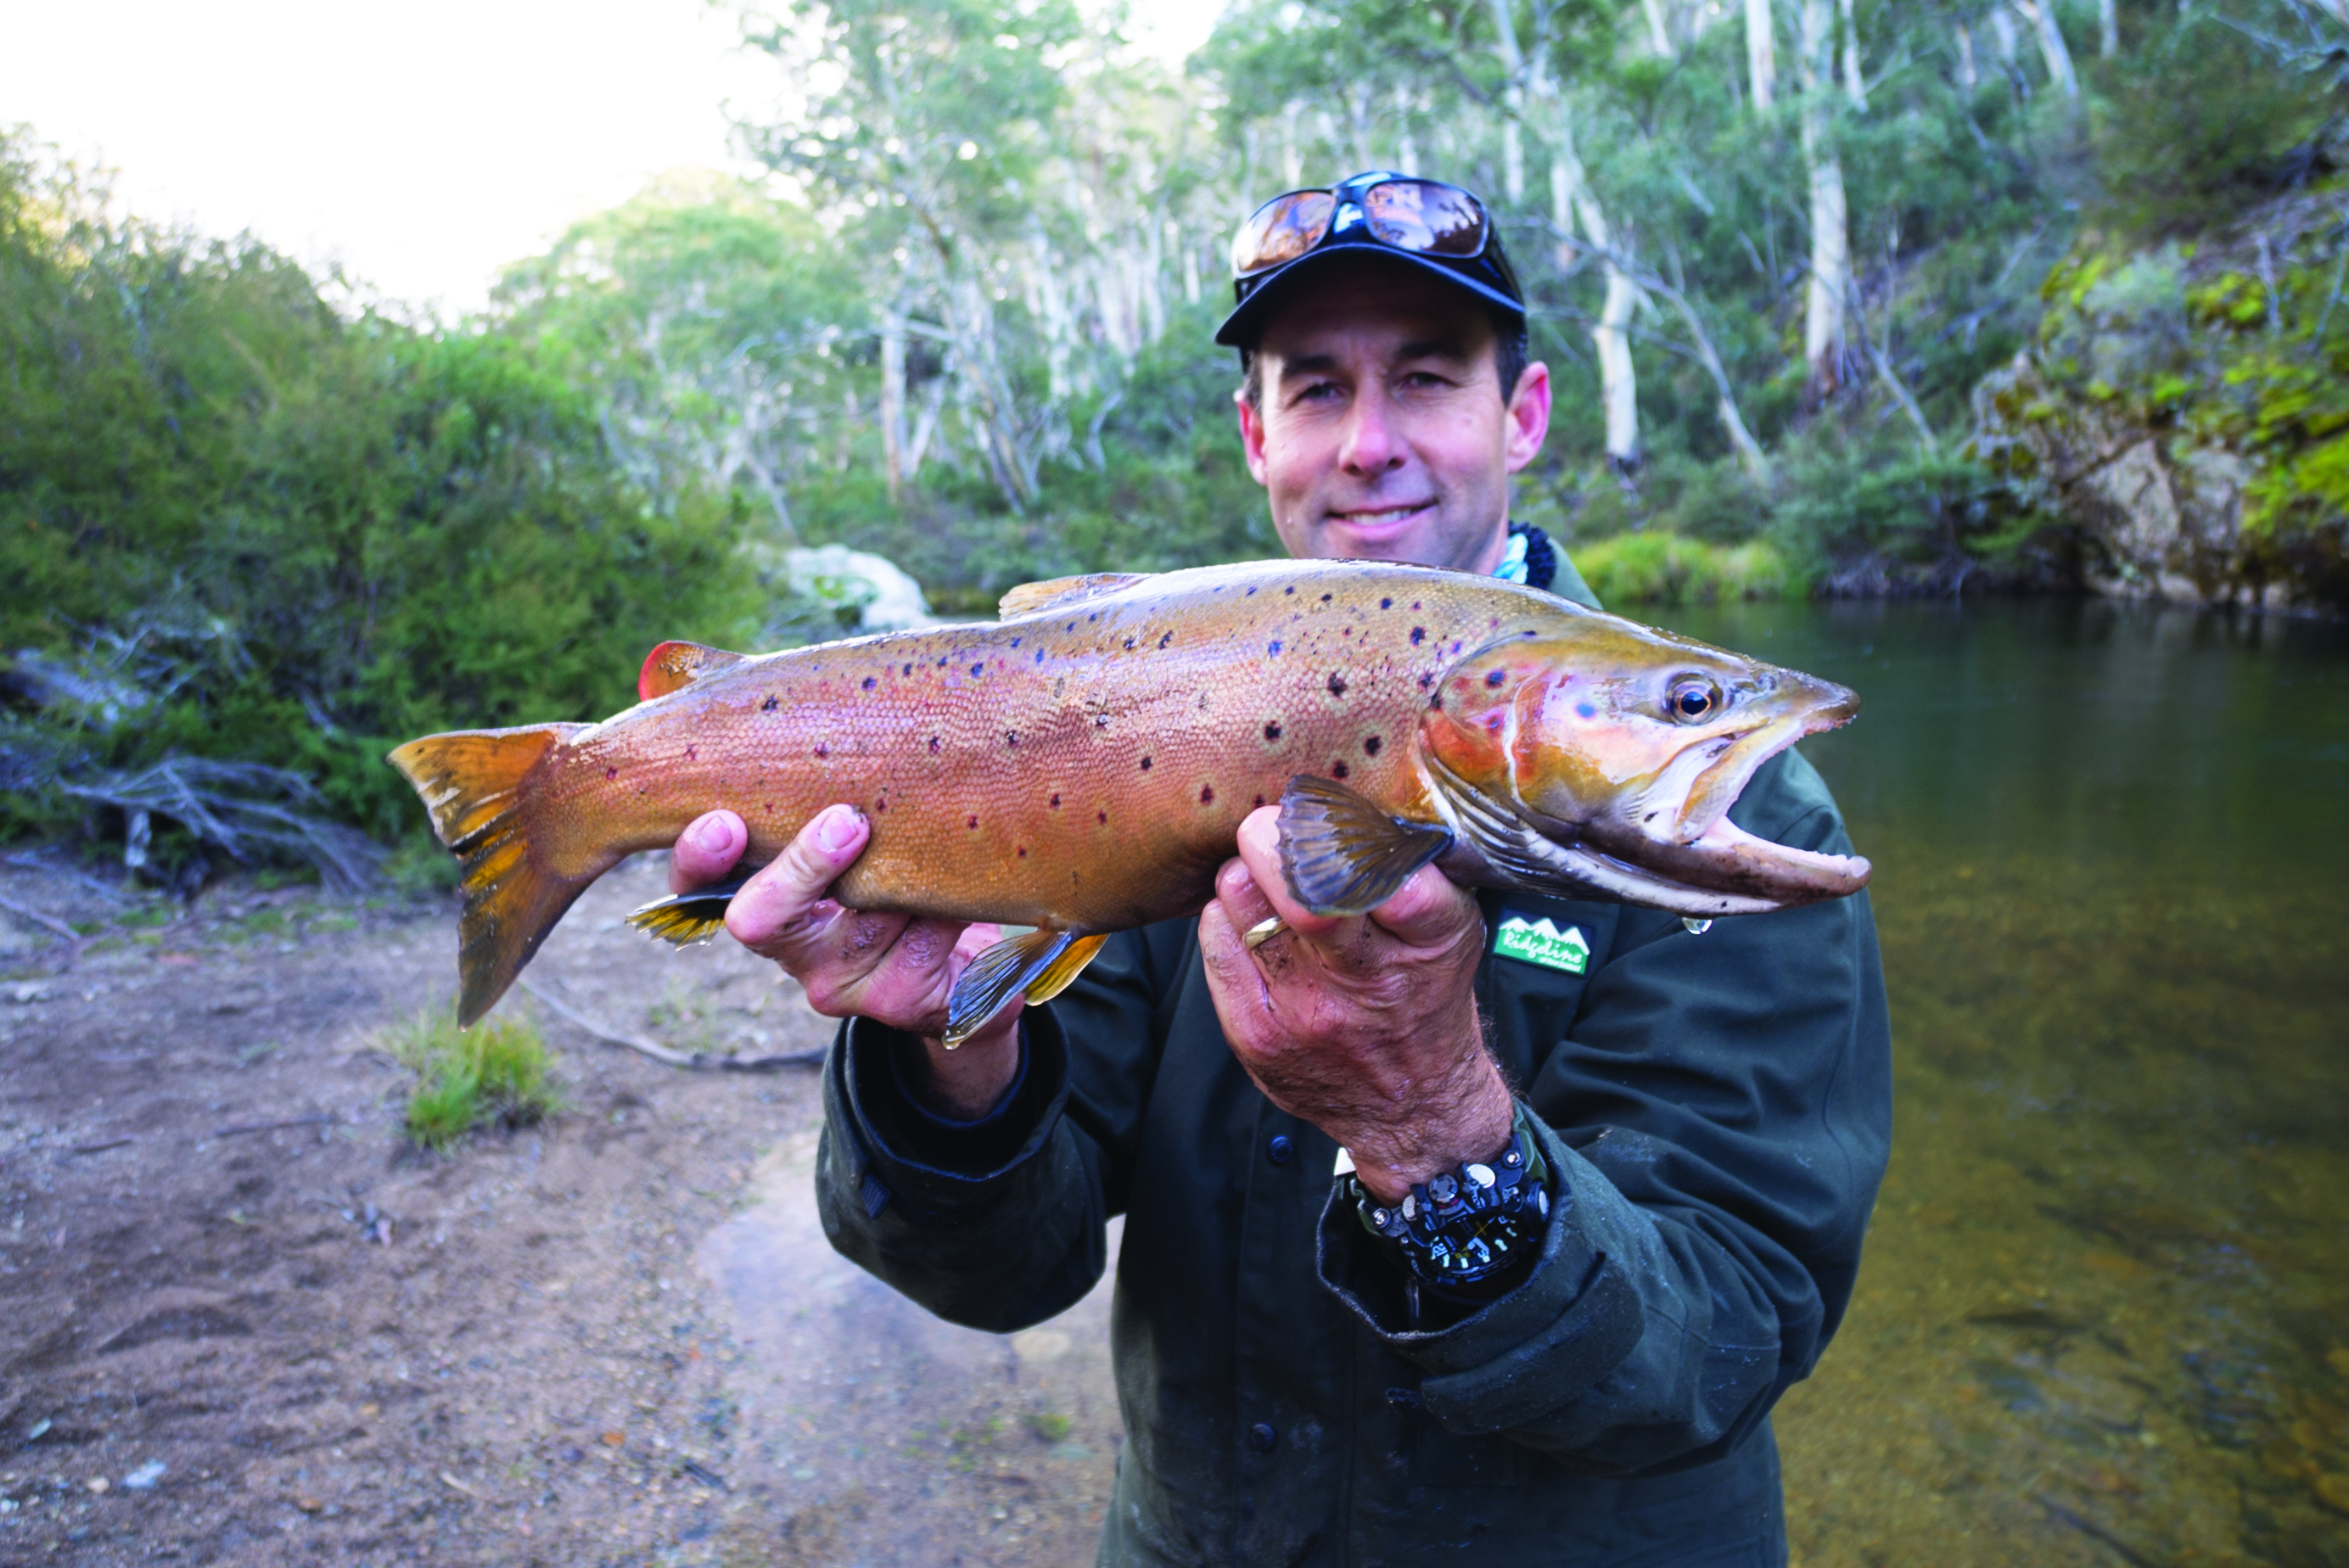 Beginners guide to trout fishing - Be A BCFing Expert